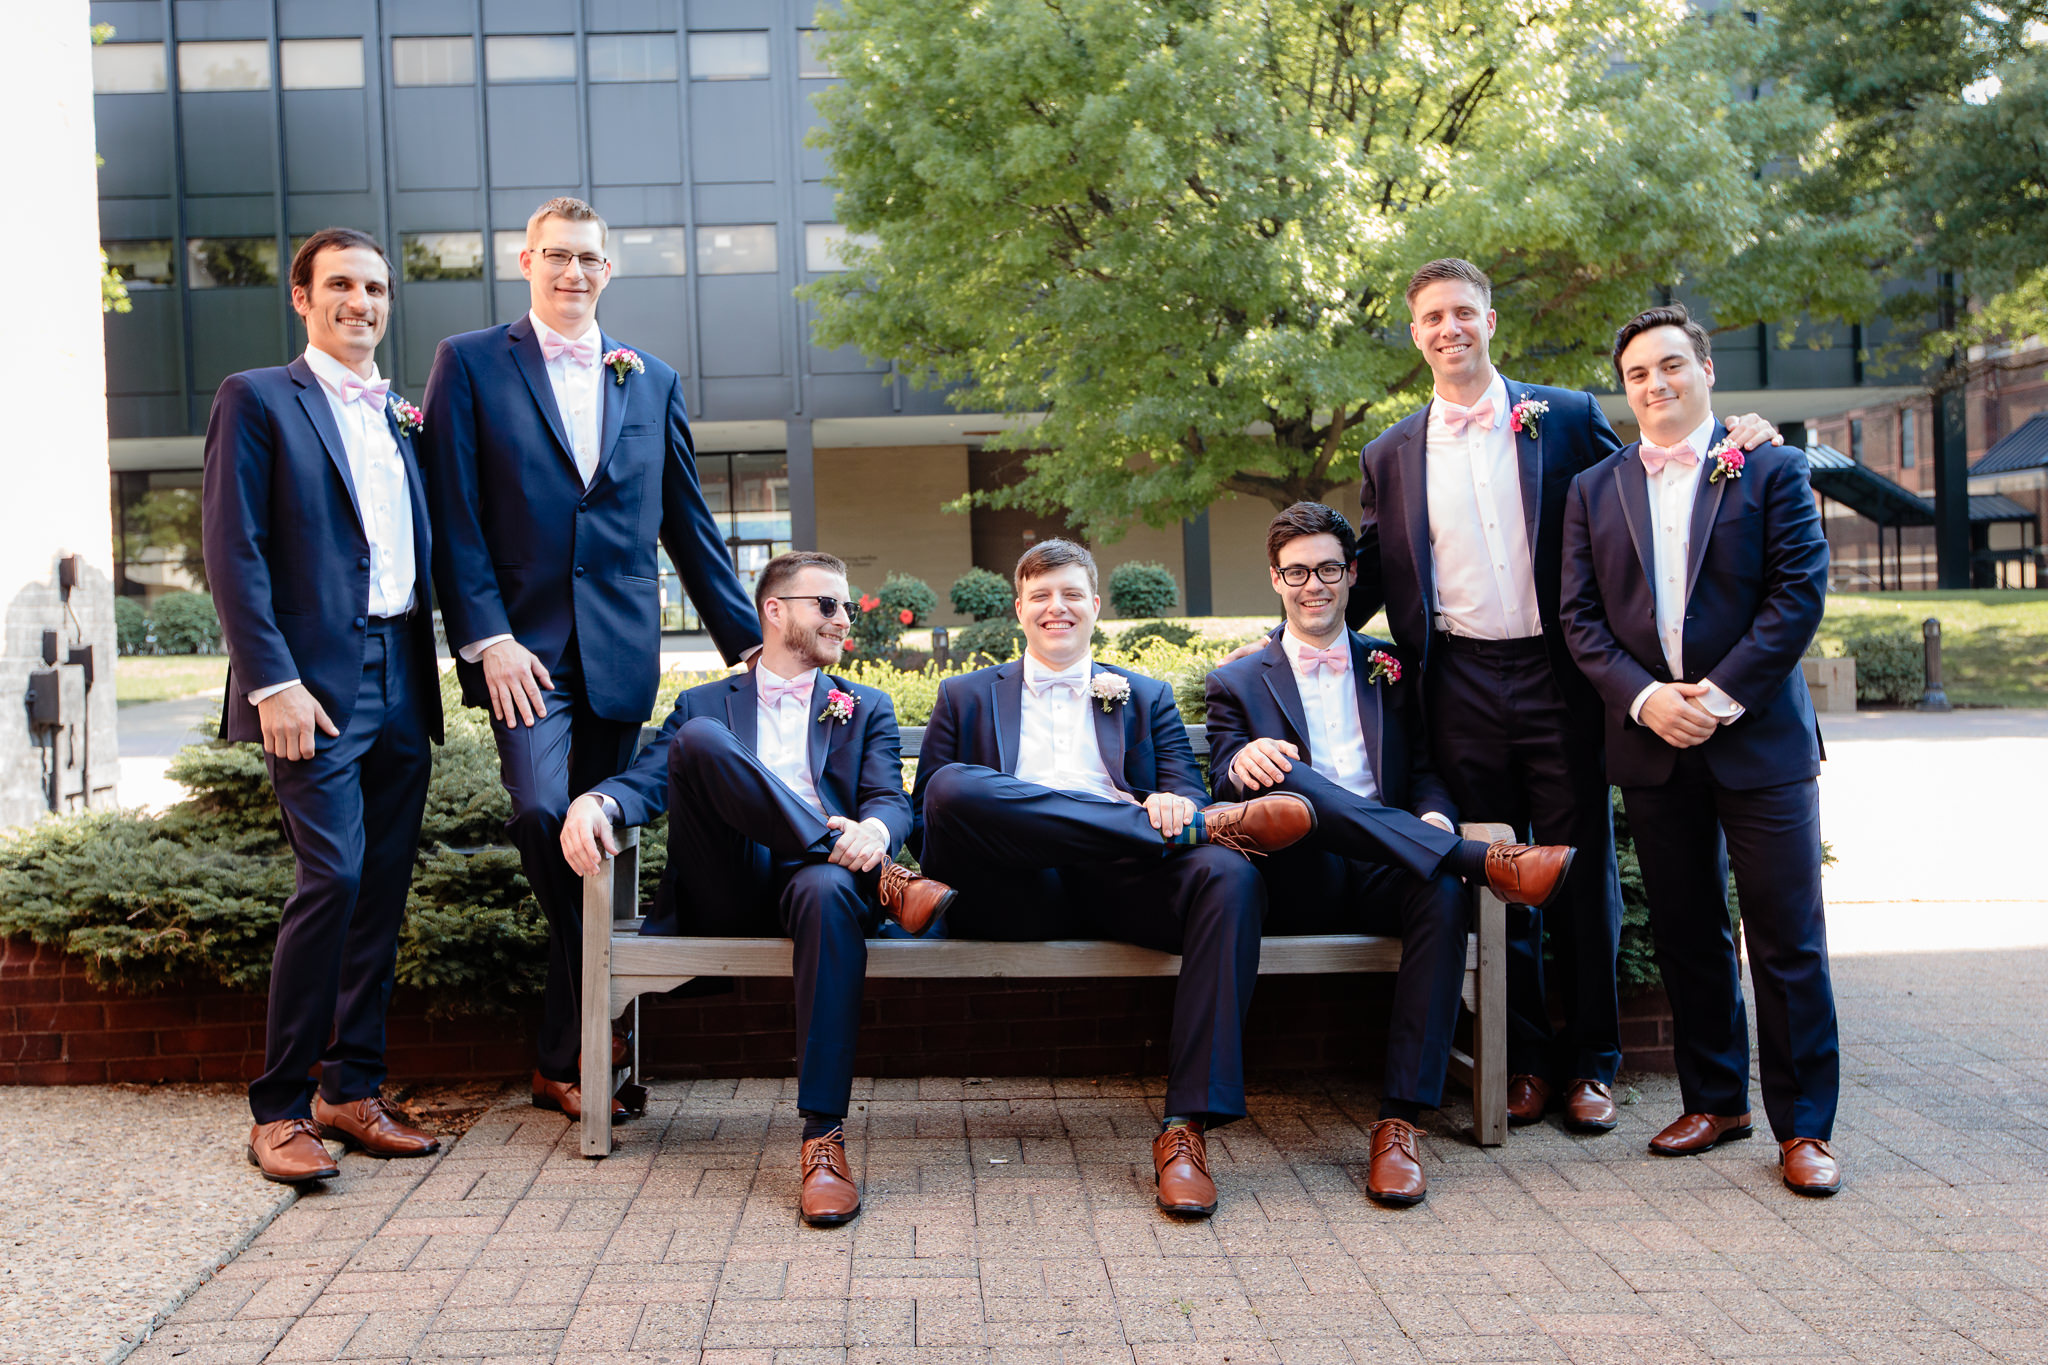 Groomsmen pose on a bench at Duquesne University